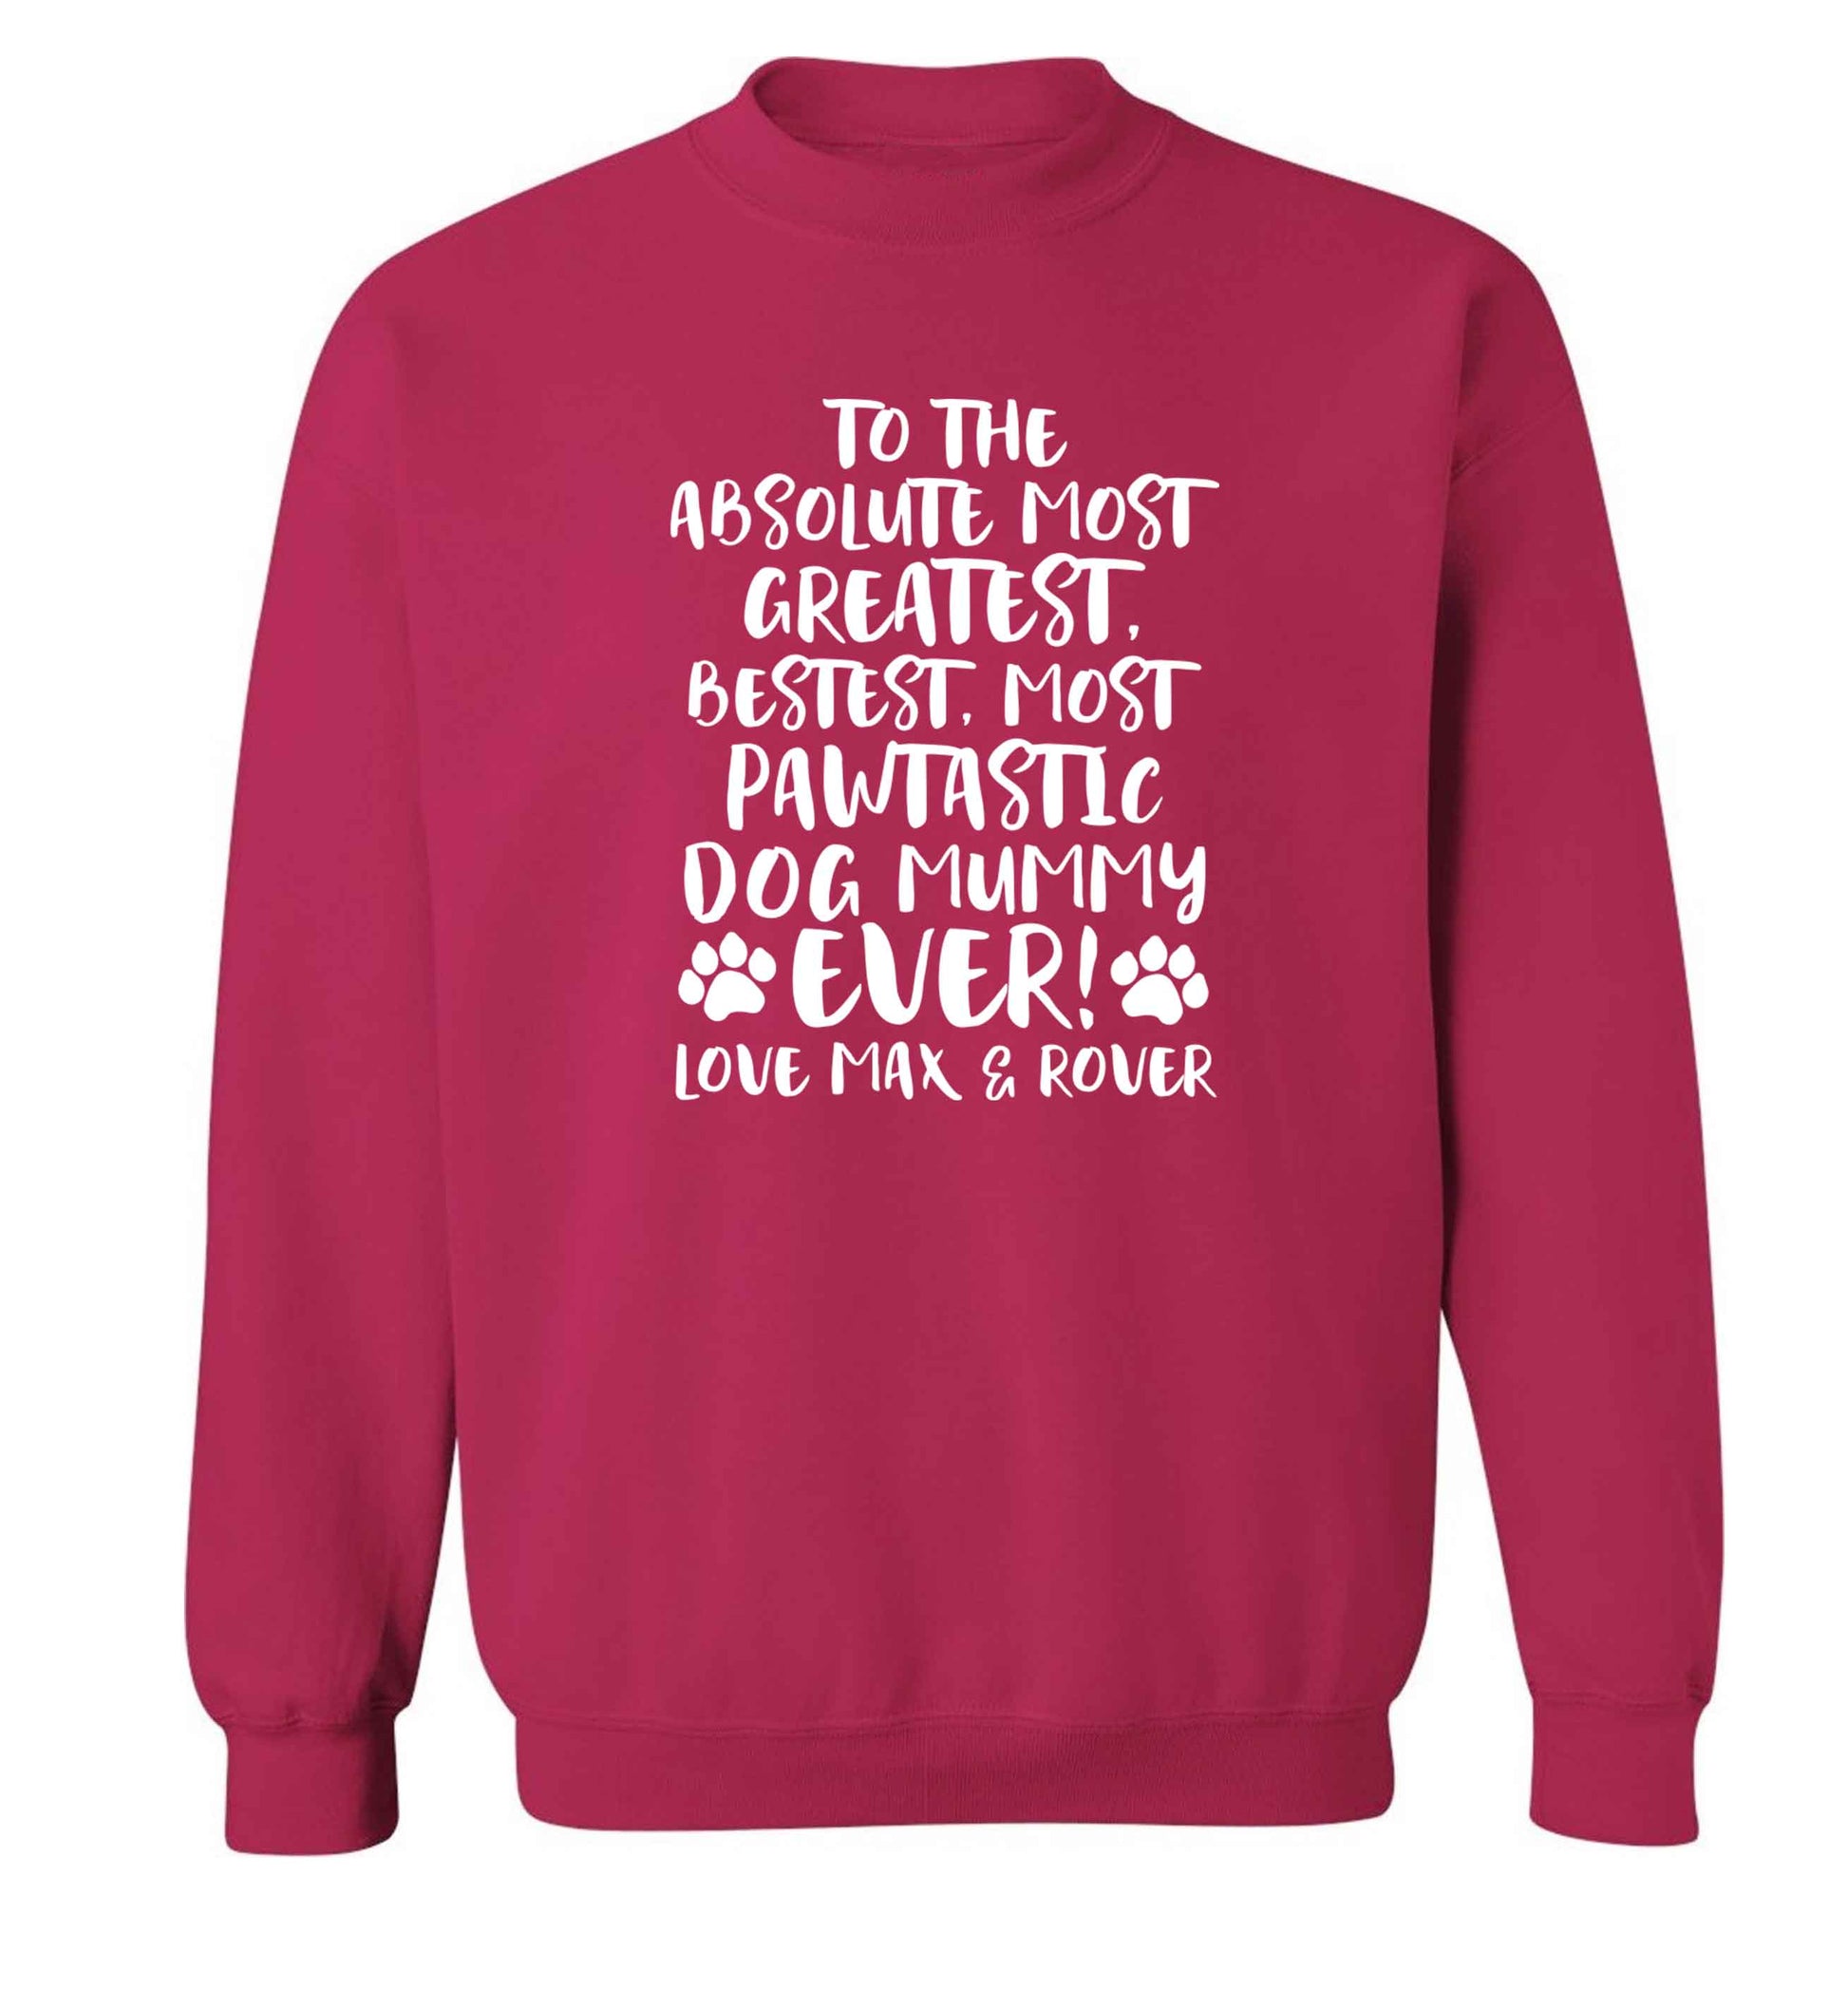 Personalsied to the most pawtastic dog mummy ever Adult's unisex pink Sweater 2XL